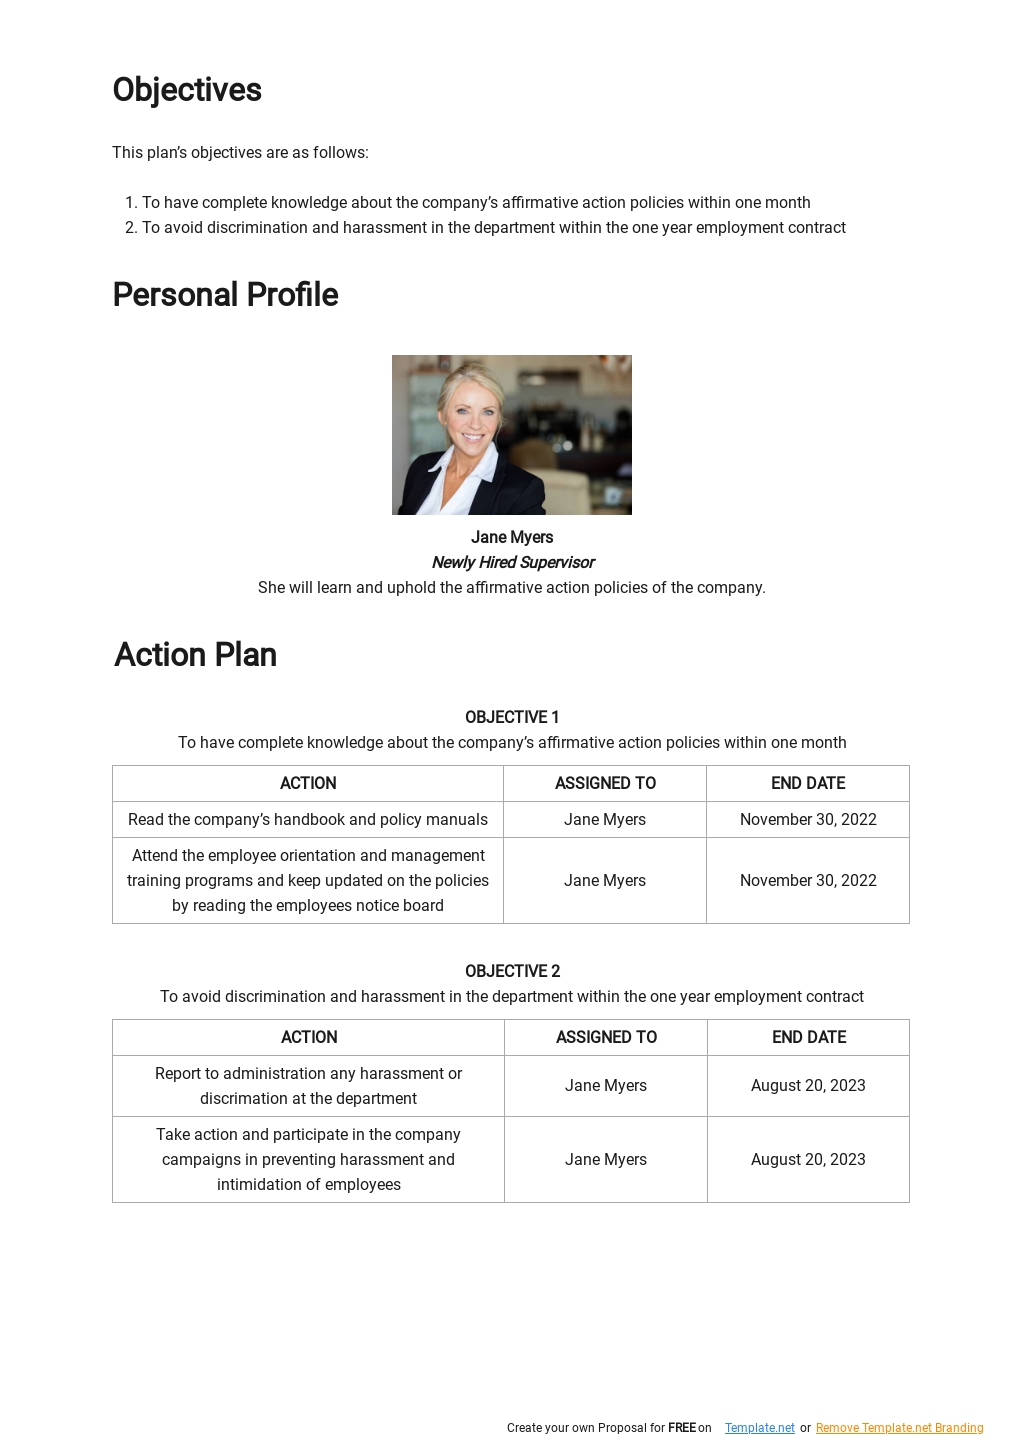 Personal Affirmative Action Plan Template 1.jpe